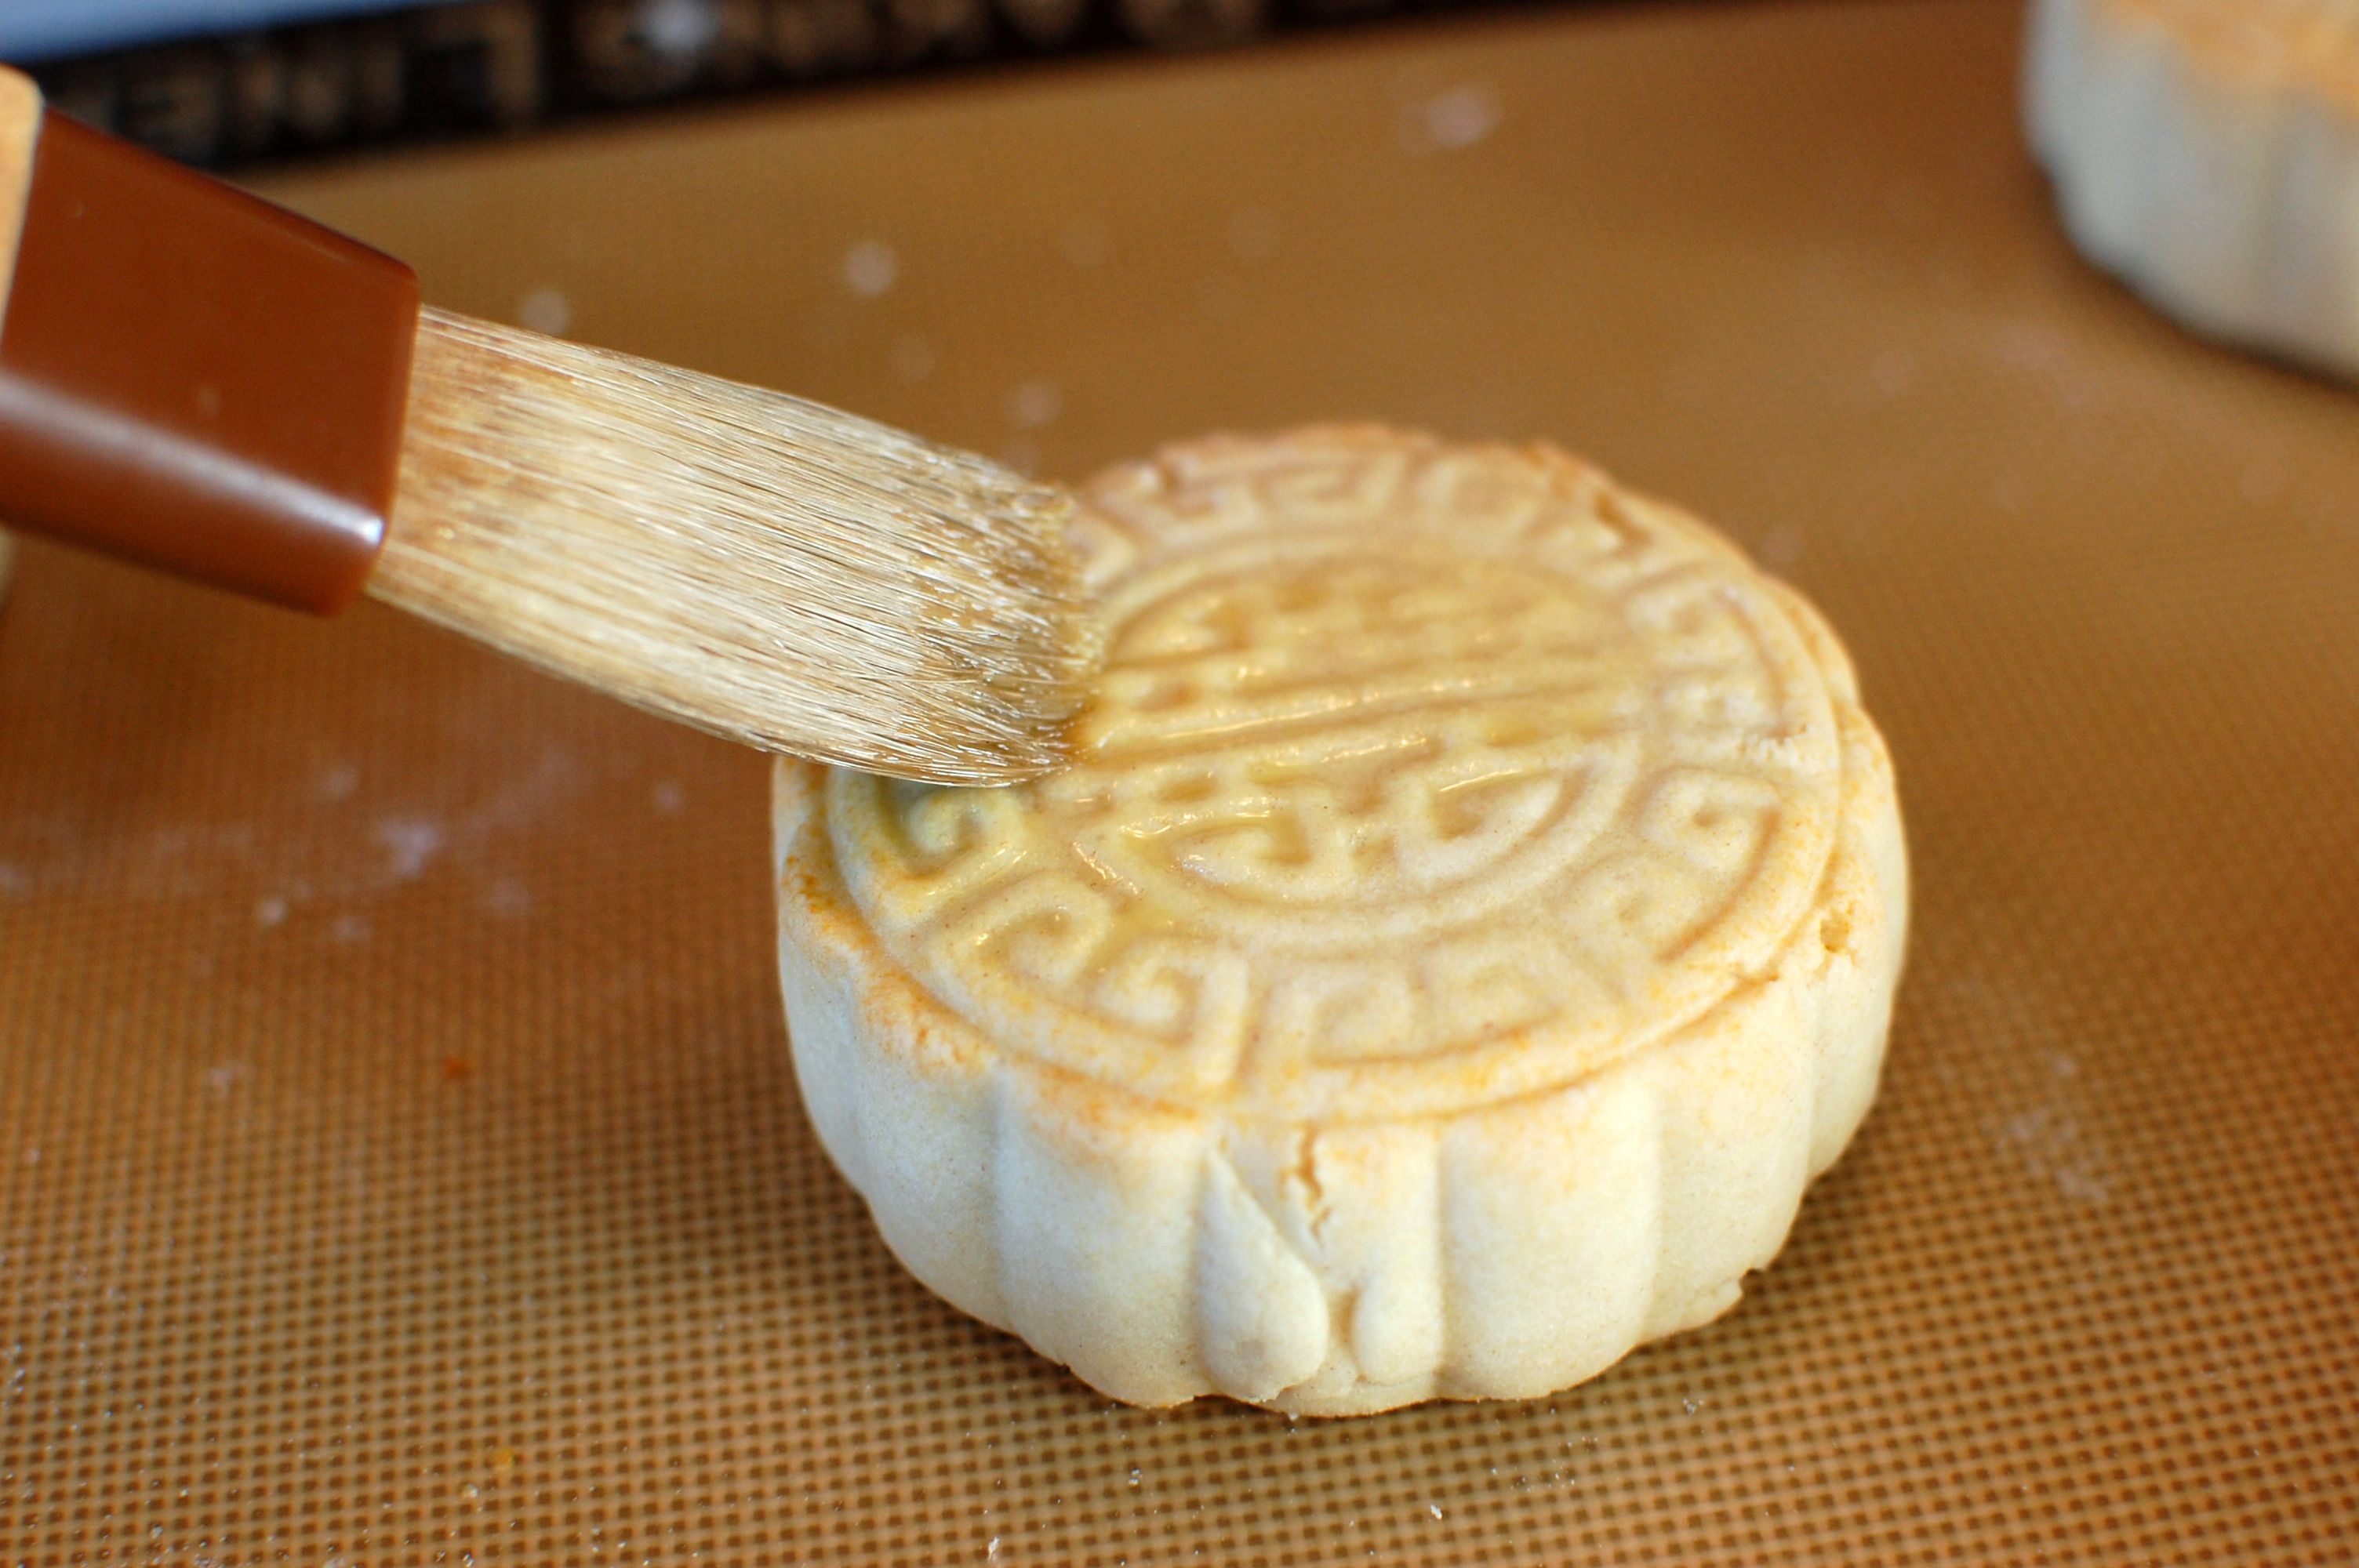 Mung Bean Mooncakes (Mooncakes made with press mold)